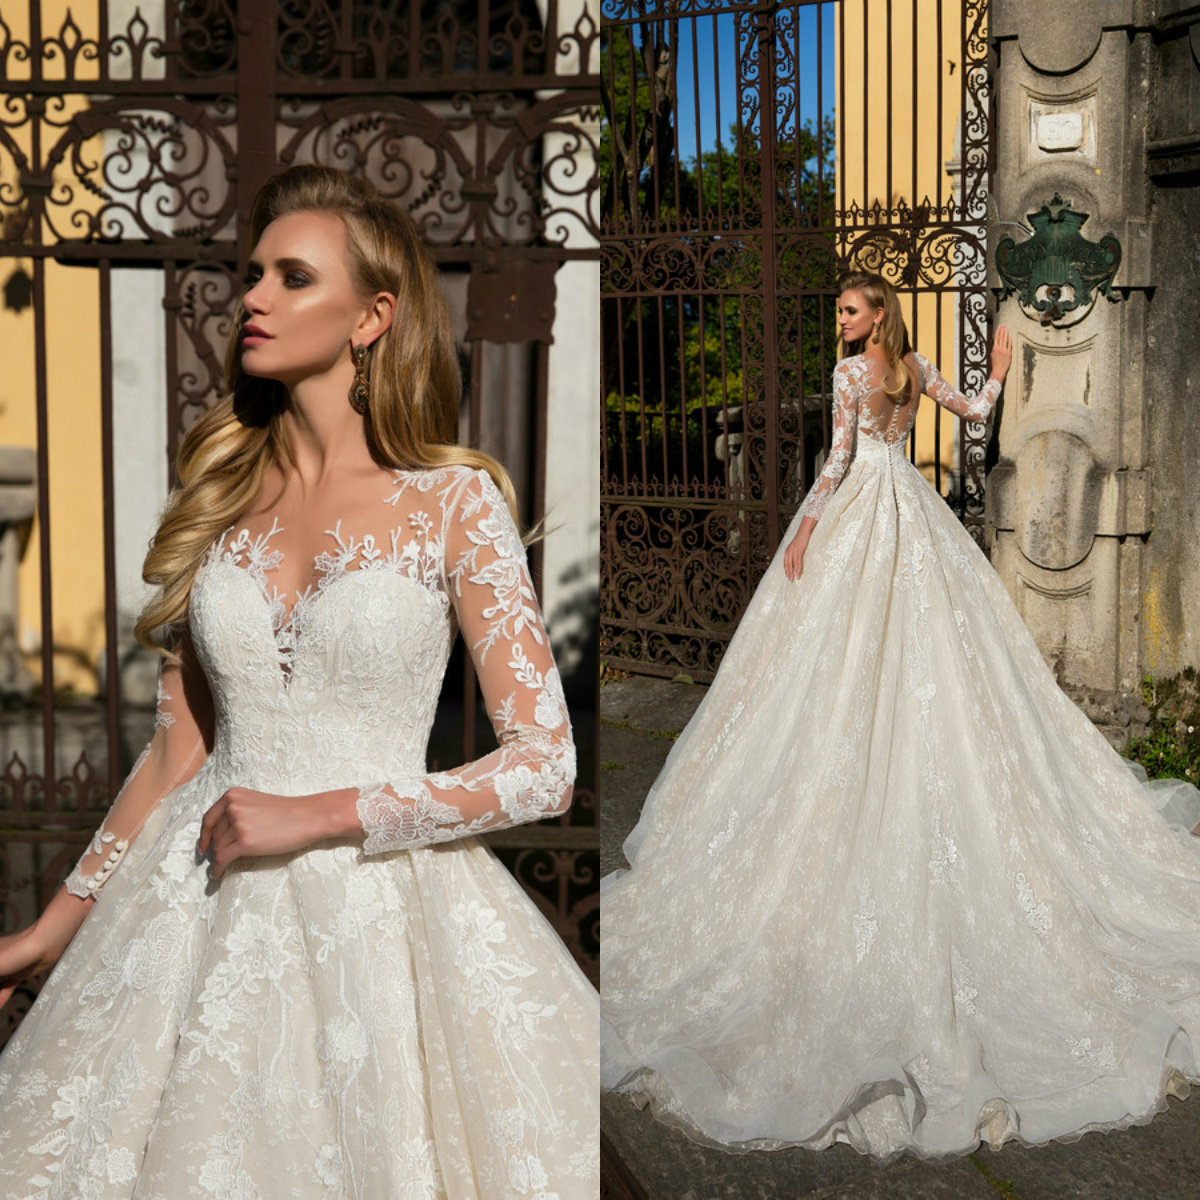 

2020 Bohemian Wedding Dresses Scoop Neck Appliqued Long Sleeves Lace Bridal Gowns Ruffle Sweep Train Custom Made Robes De Mariée, Same as image